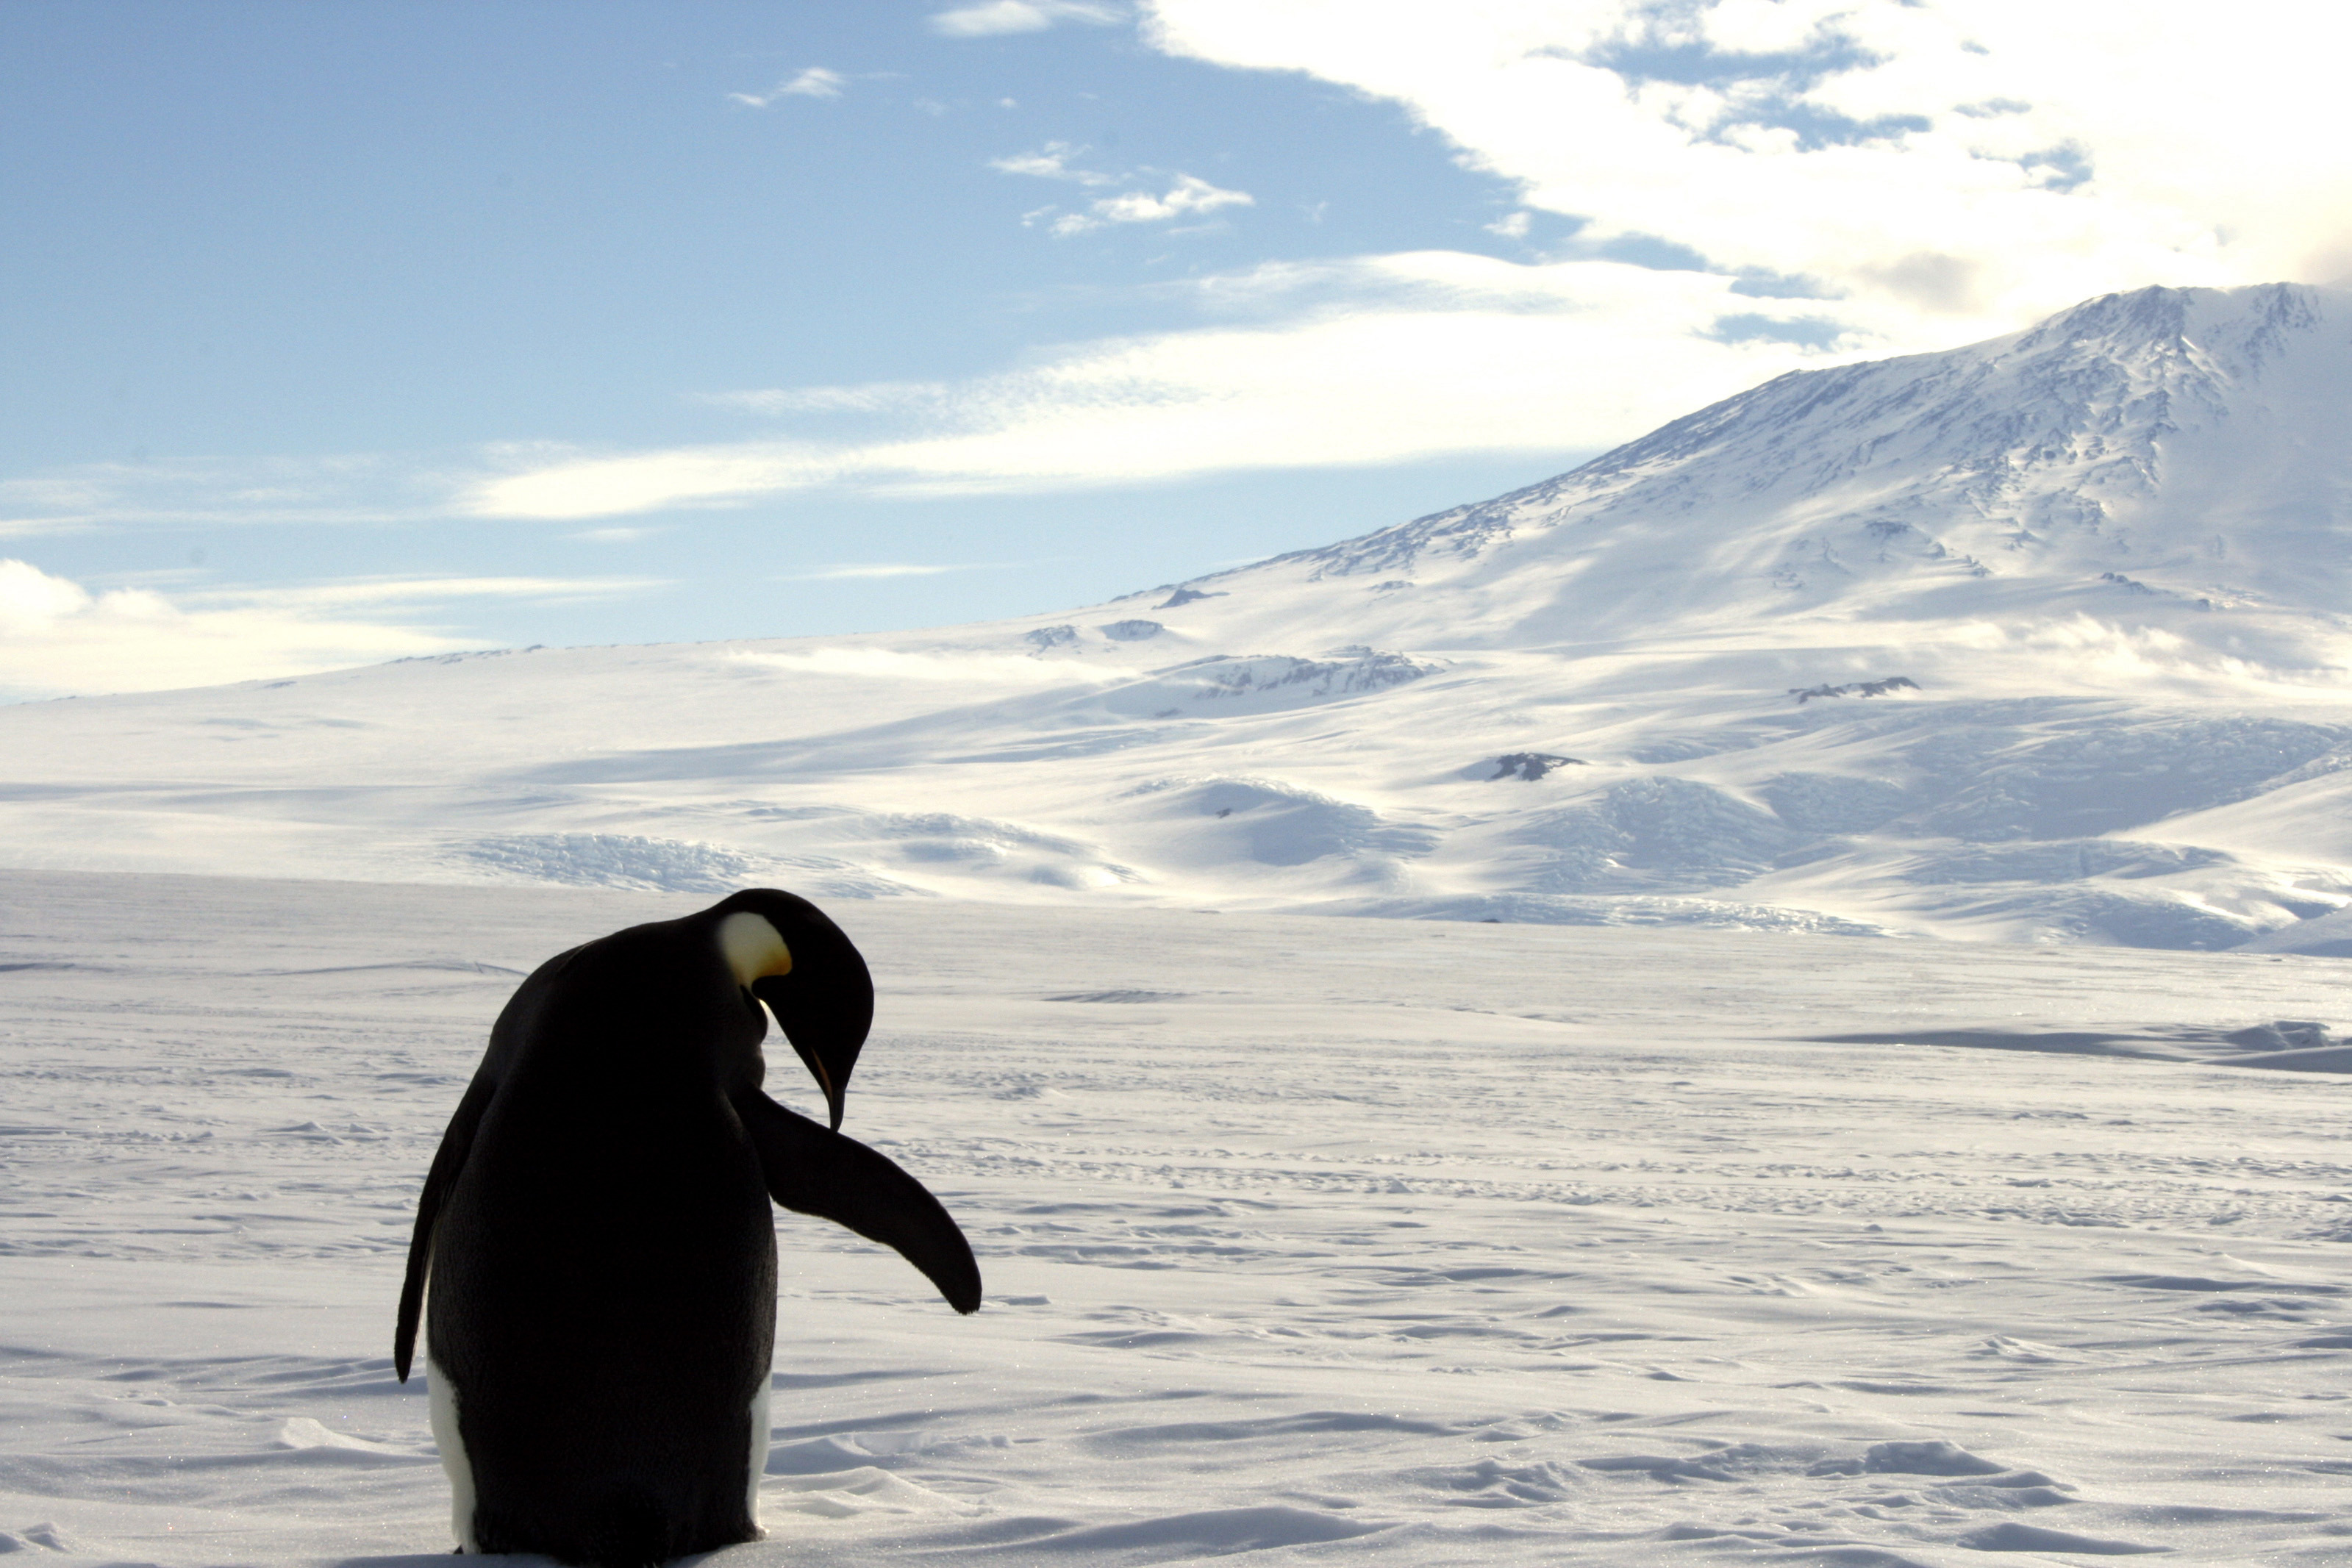 A foraging Emperor penguin preens on snow-covered sea ice around the base of the active volcano Mount Erebus